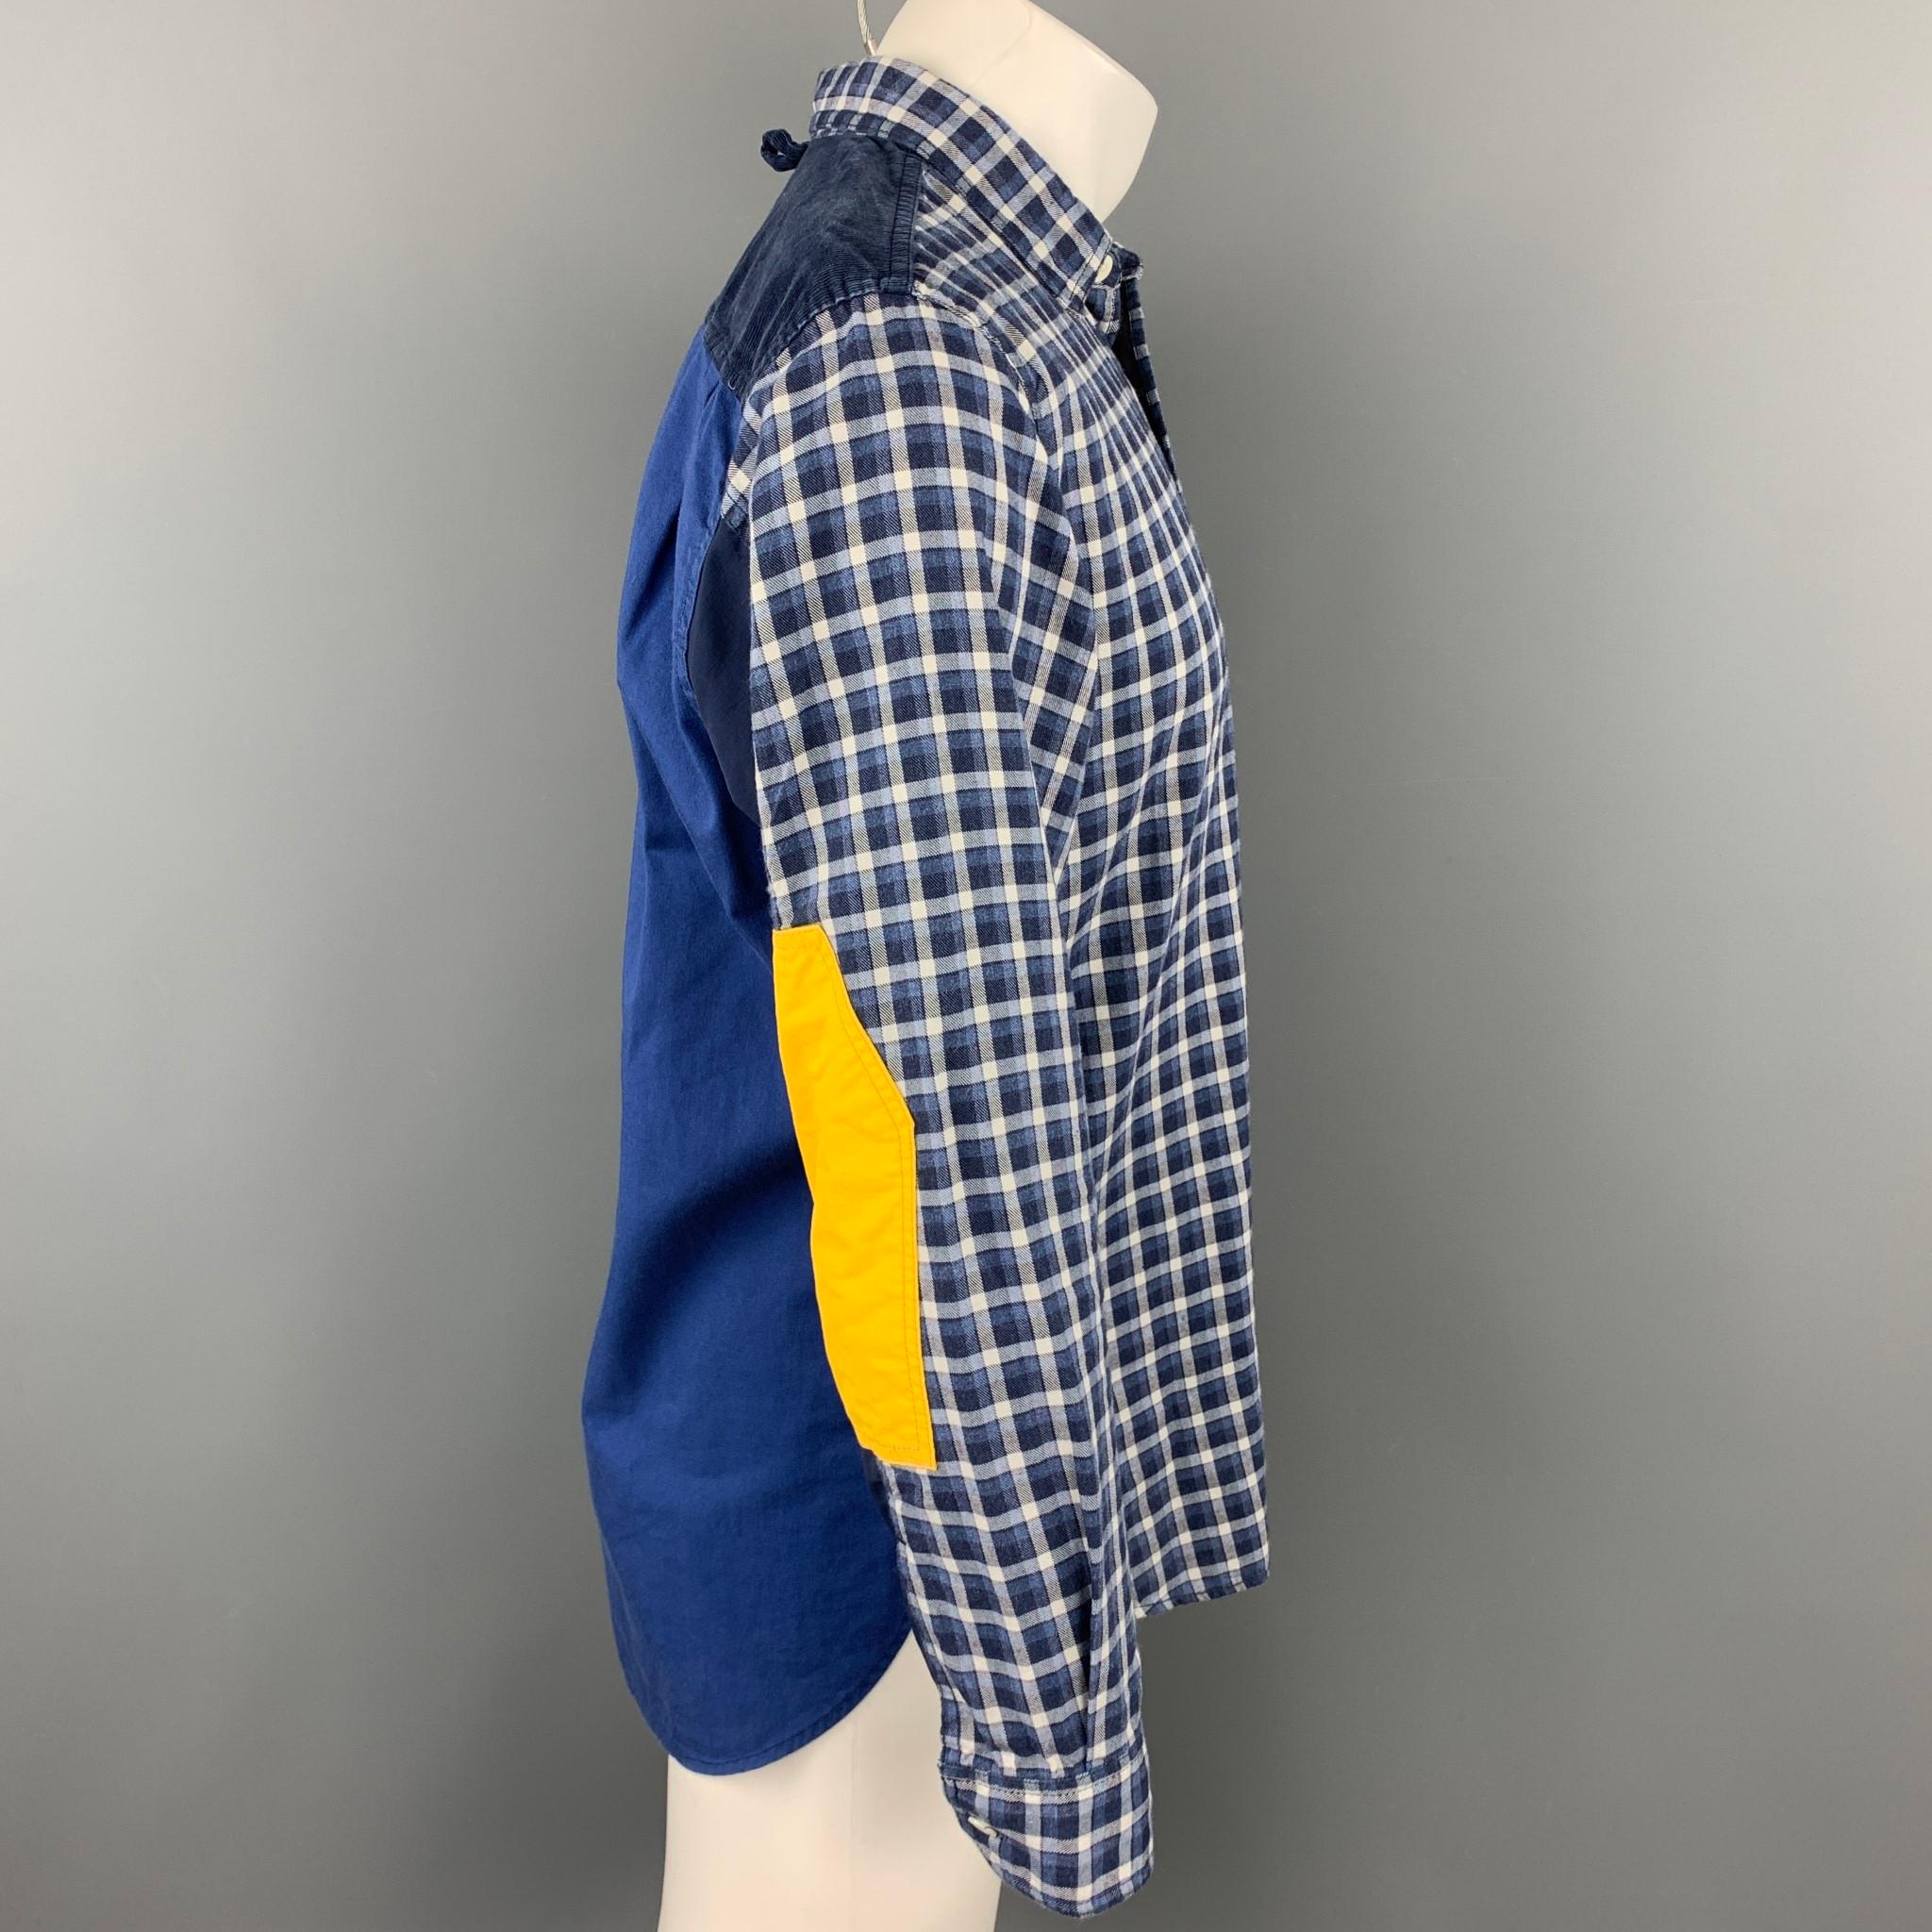 JUNYA WATANABE long sleeve shirt comes in a navy & white plaid cotton with patchwork details featuring a button up style, front pocket, elbow patches, and a spread collar. Made in Japan.

Very Good Pre-Owned Condition.
Marked: